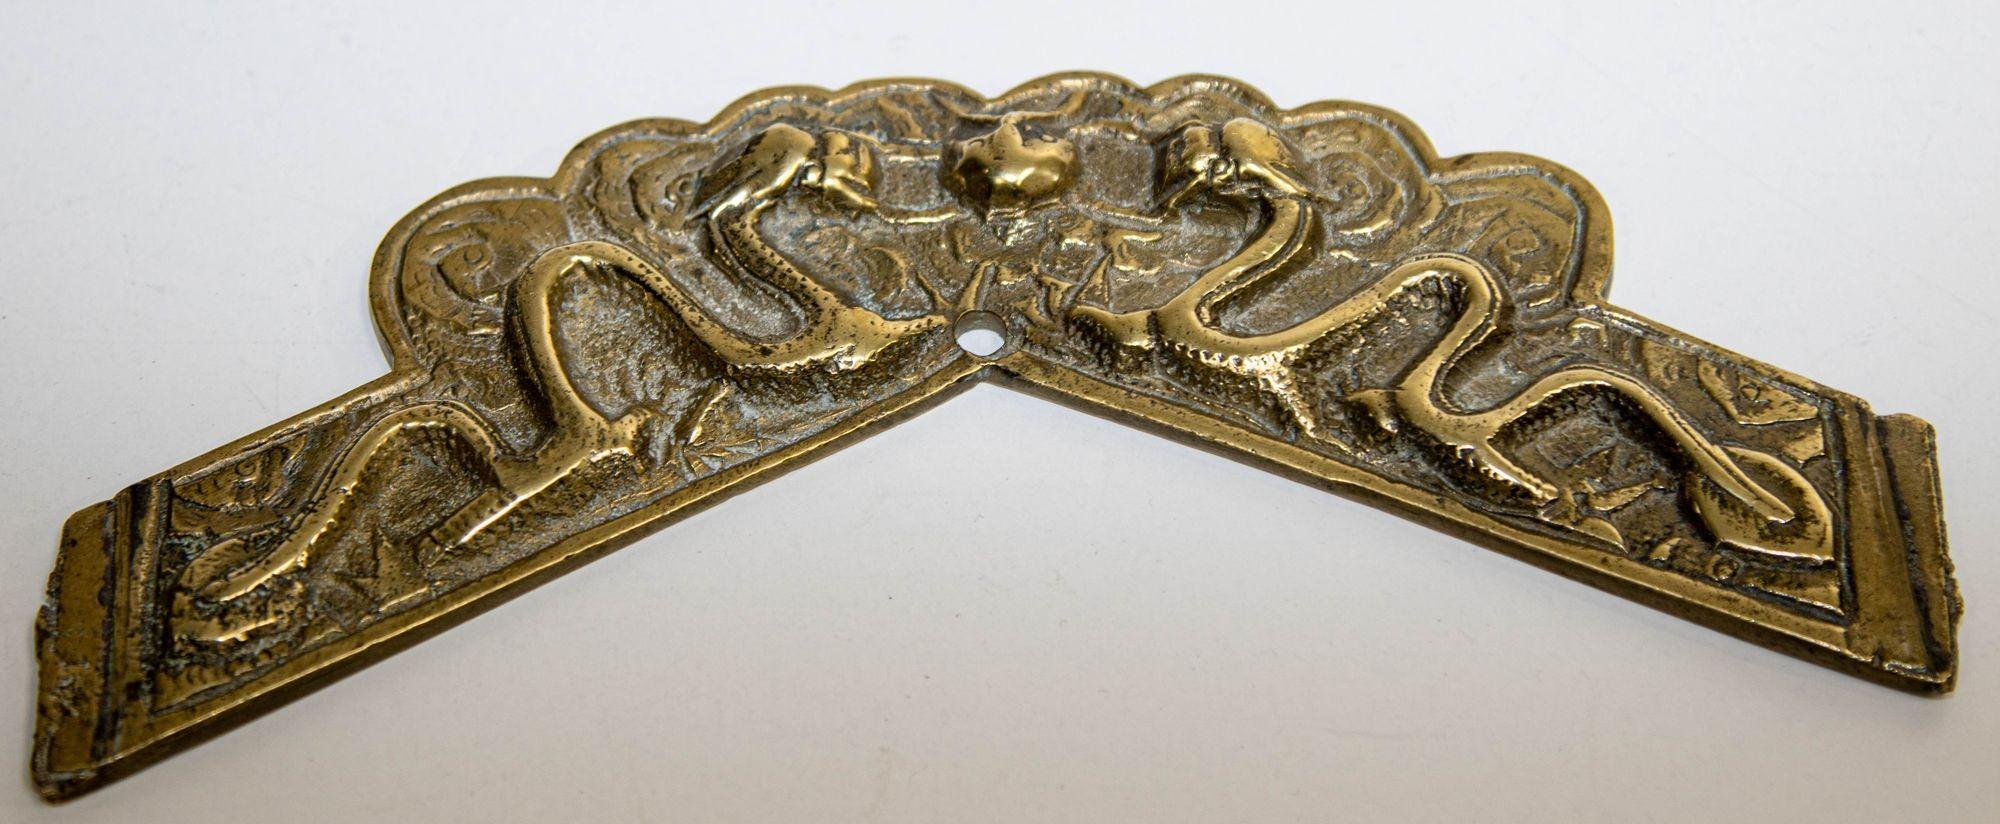 Vintage Asian Chinese Brass Prosperity Dragon Wall Hanging For Sale 9